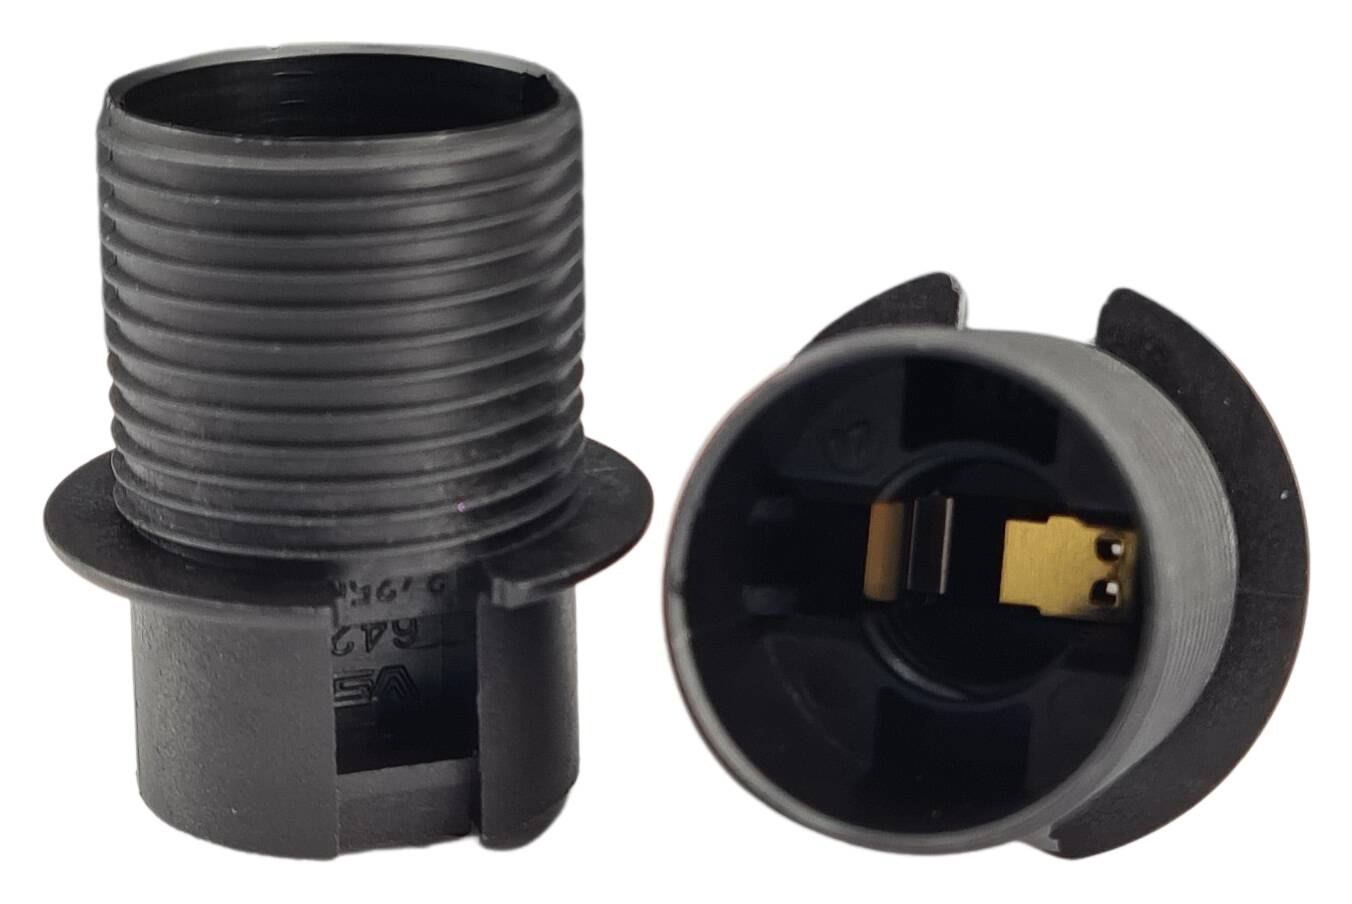 E14 partial-threaded for thermoplastic lampholder black